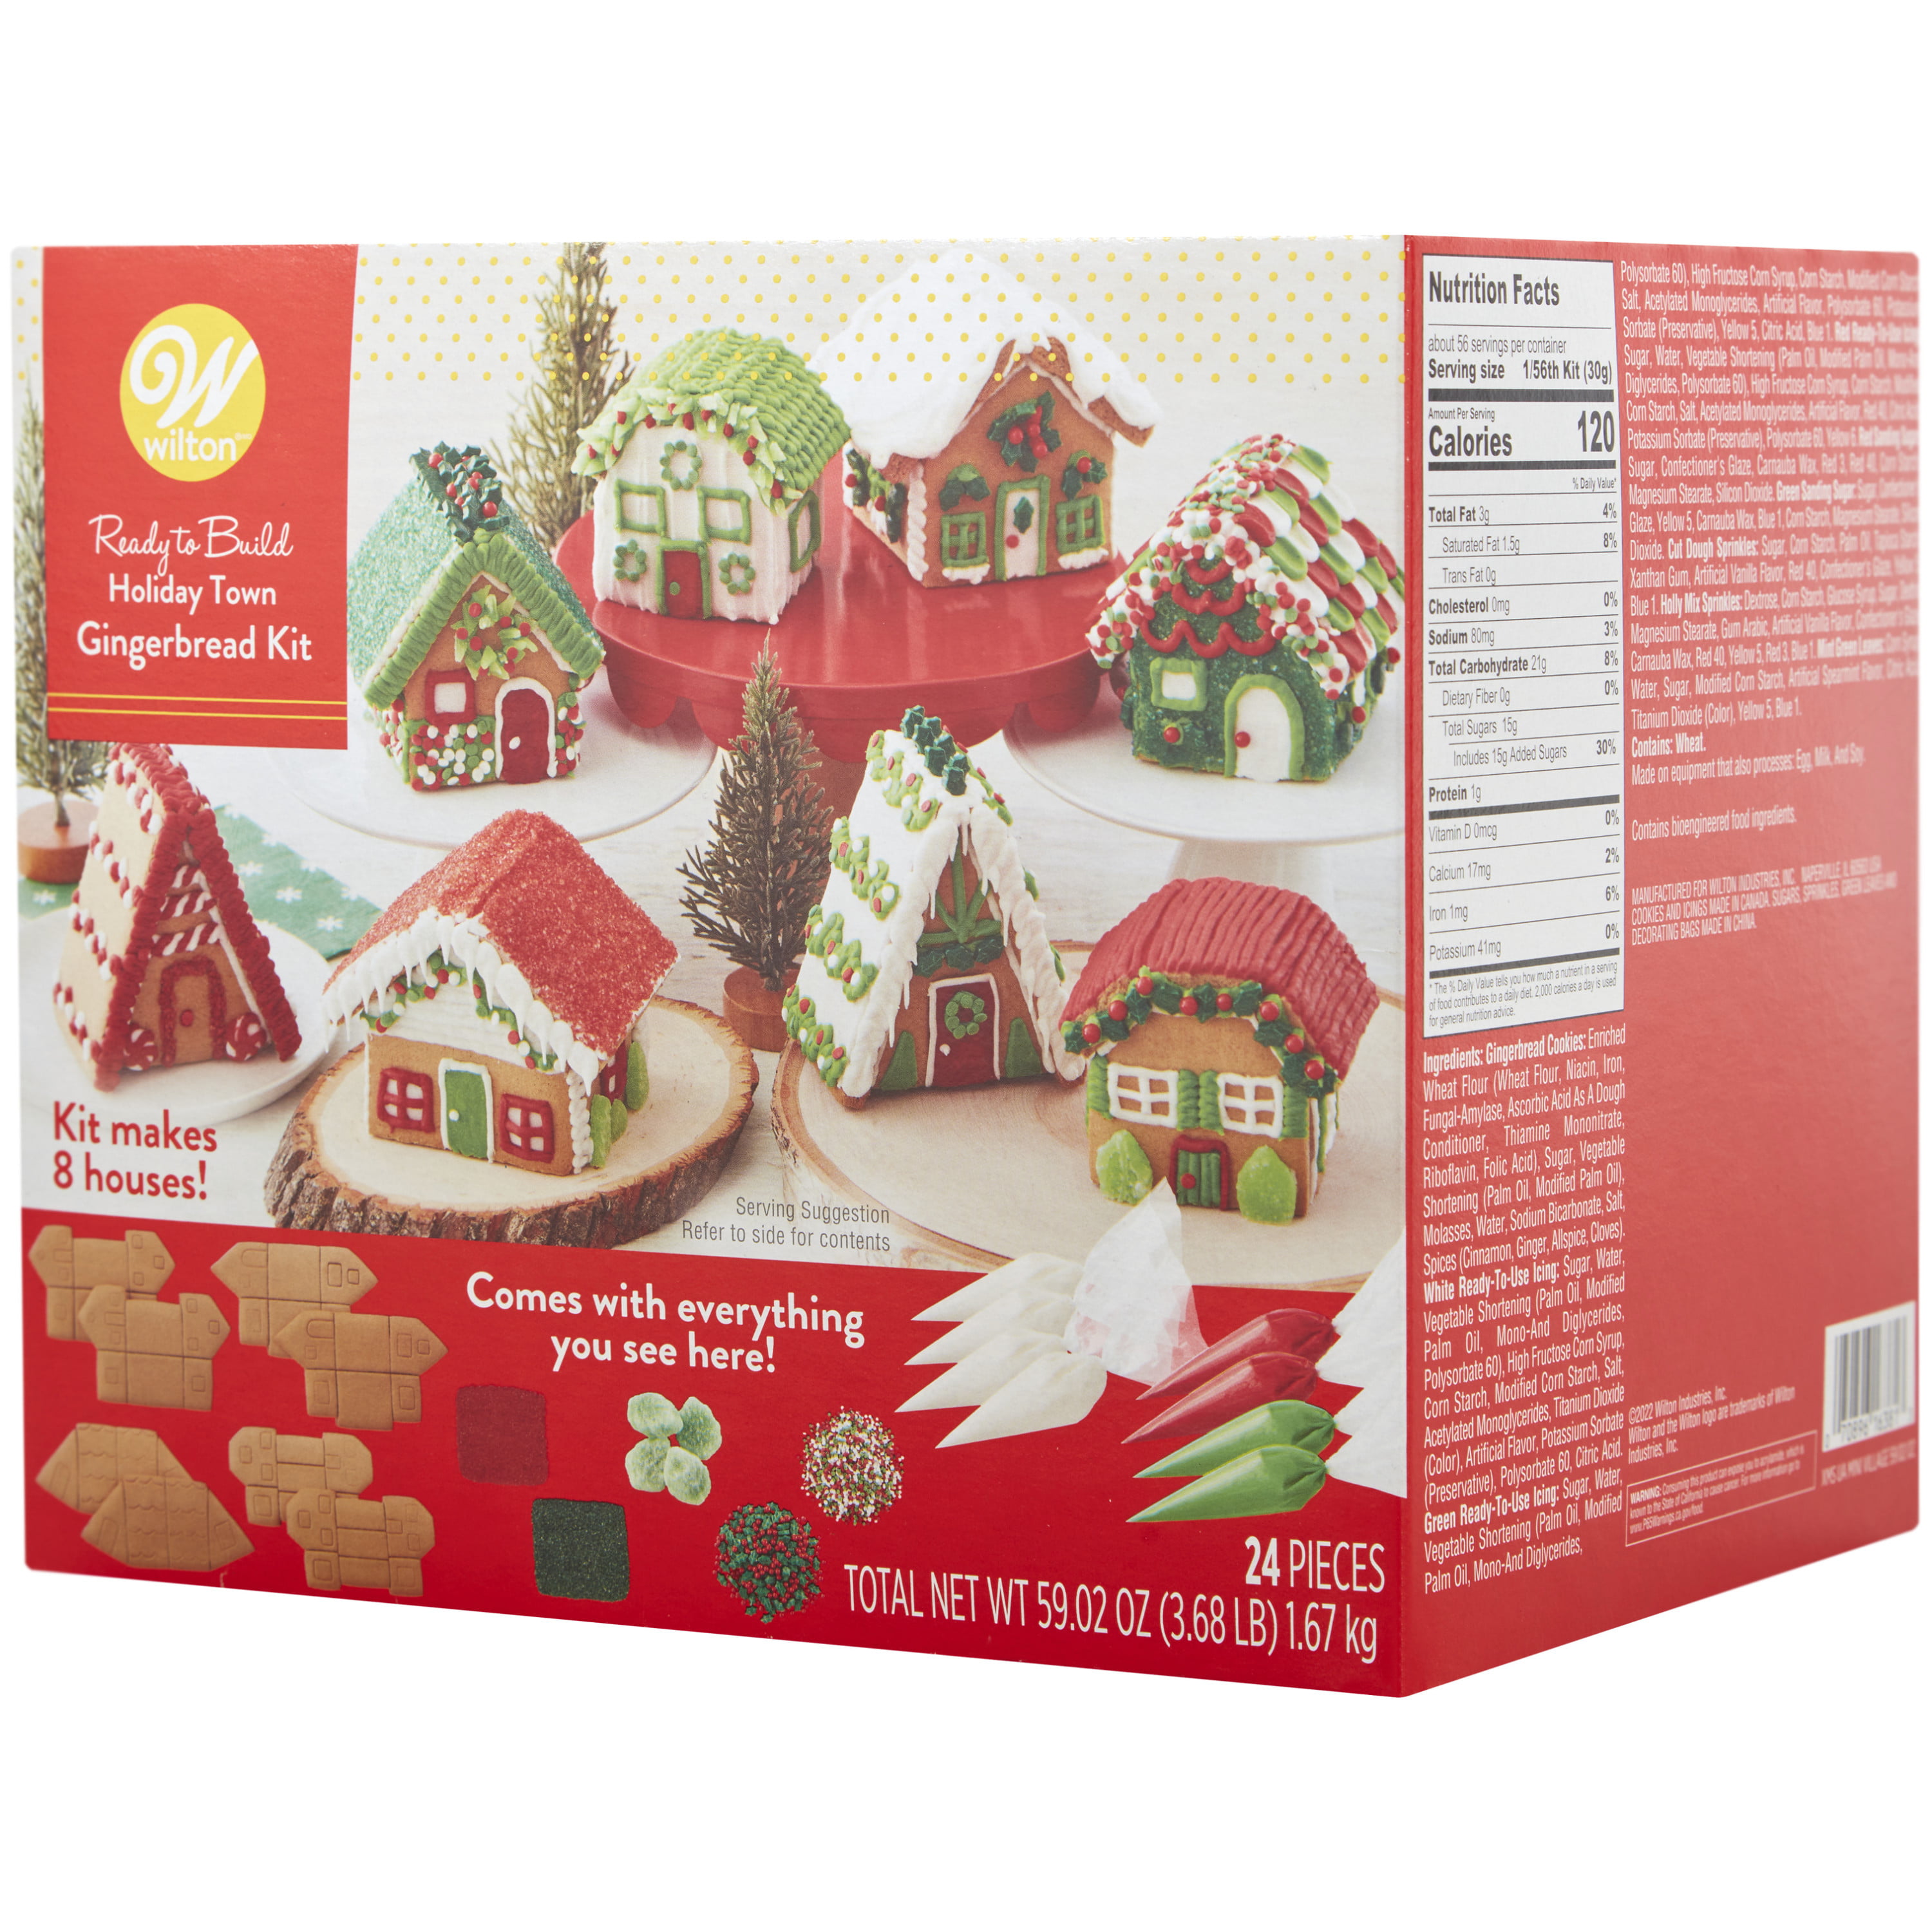 Wilton Built it Yourself Mini Village Gingerbread Decorating Kit to Make 4  Houses - Christmas Gingerbread House Kit for Adults - 13 Pieces in Total